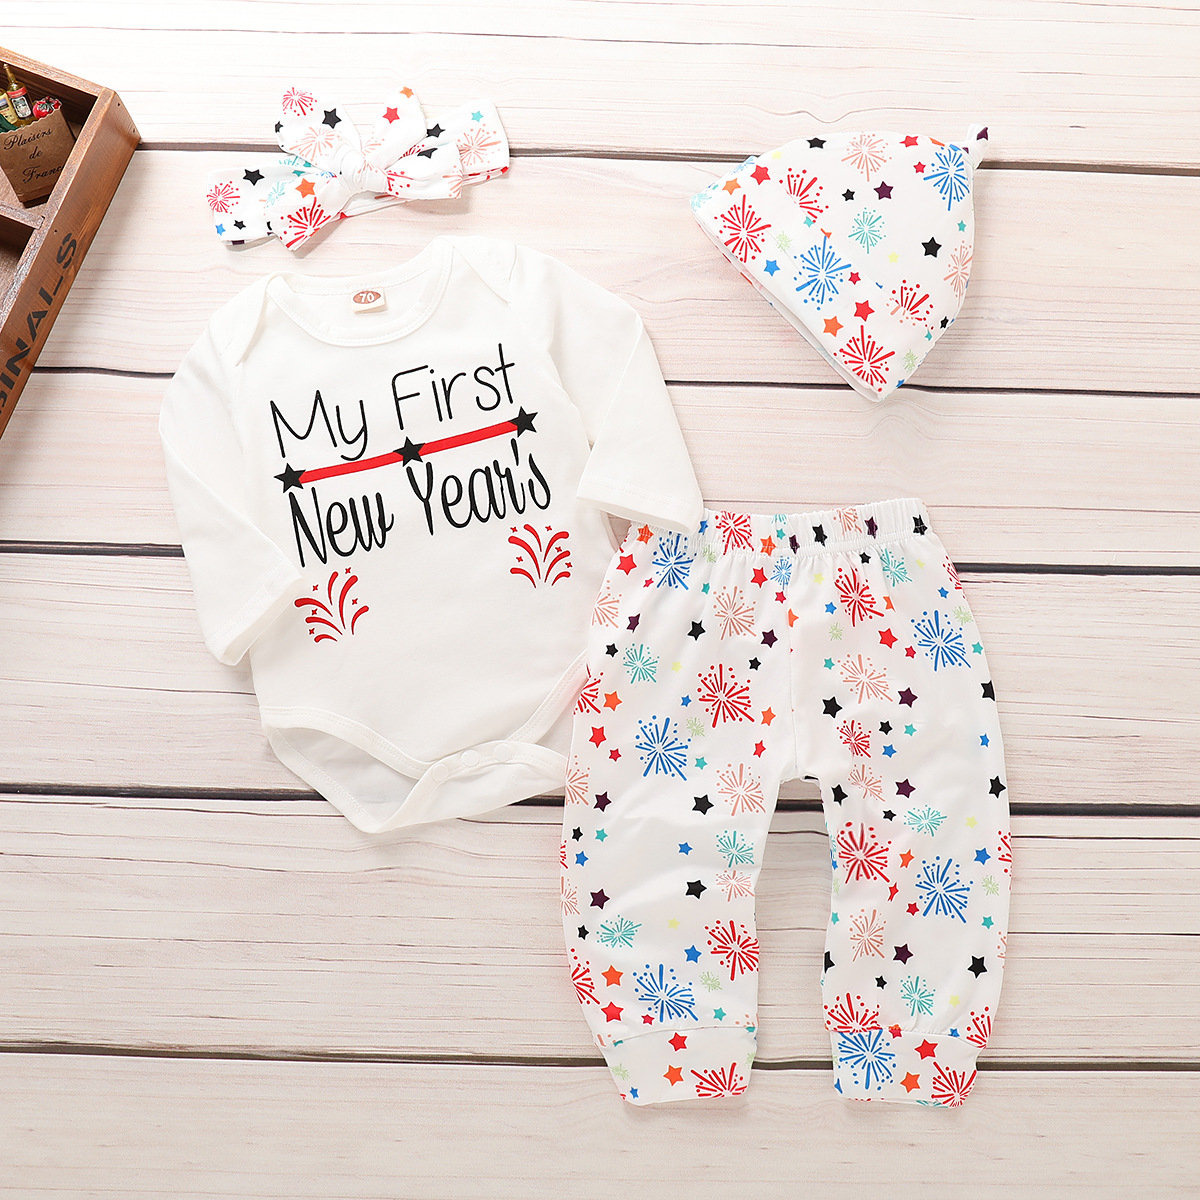 

4Pcs New Year Print Baby Romper Clothing Set For 0-24M, Off white